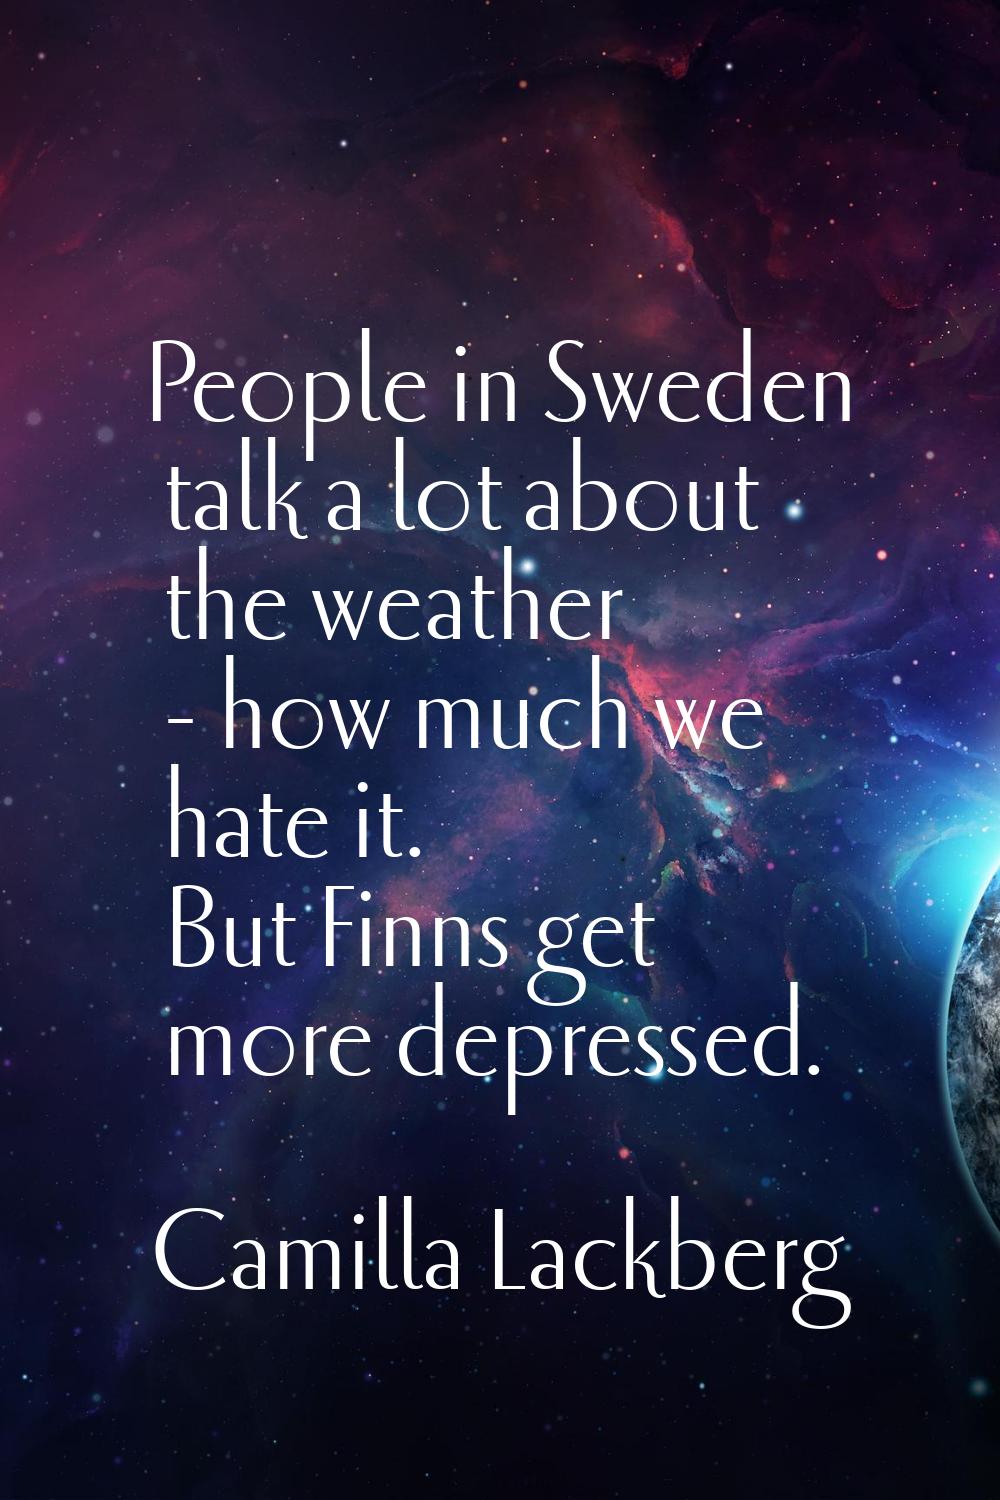 People in Sweden talk a lot about the weather - how much we hate it. But Finns get more depressed.